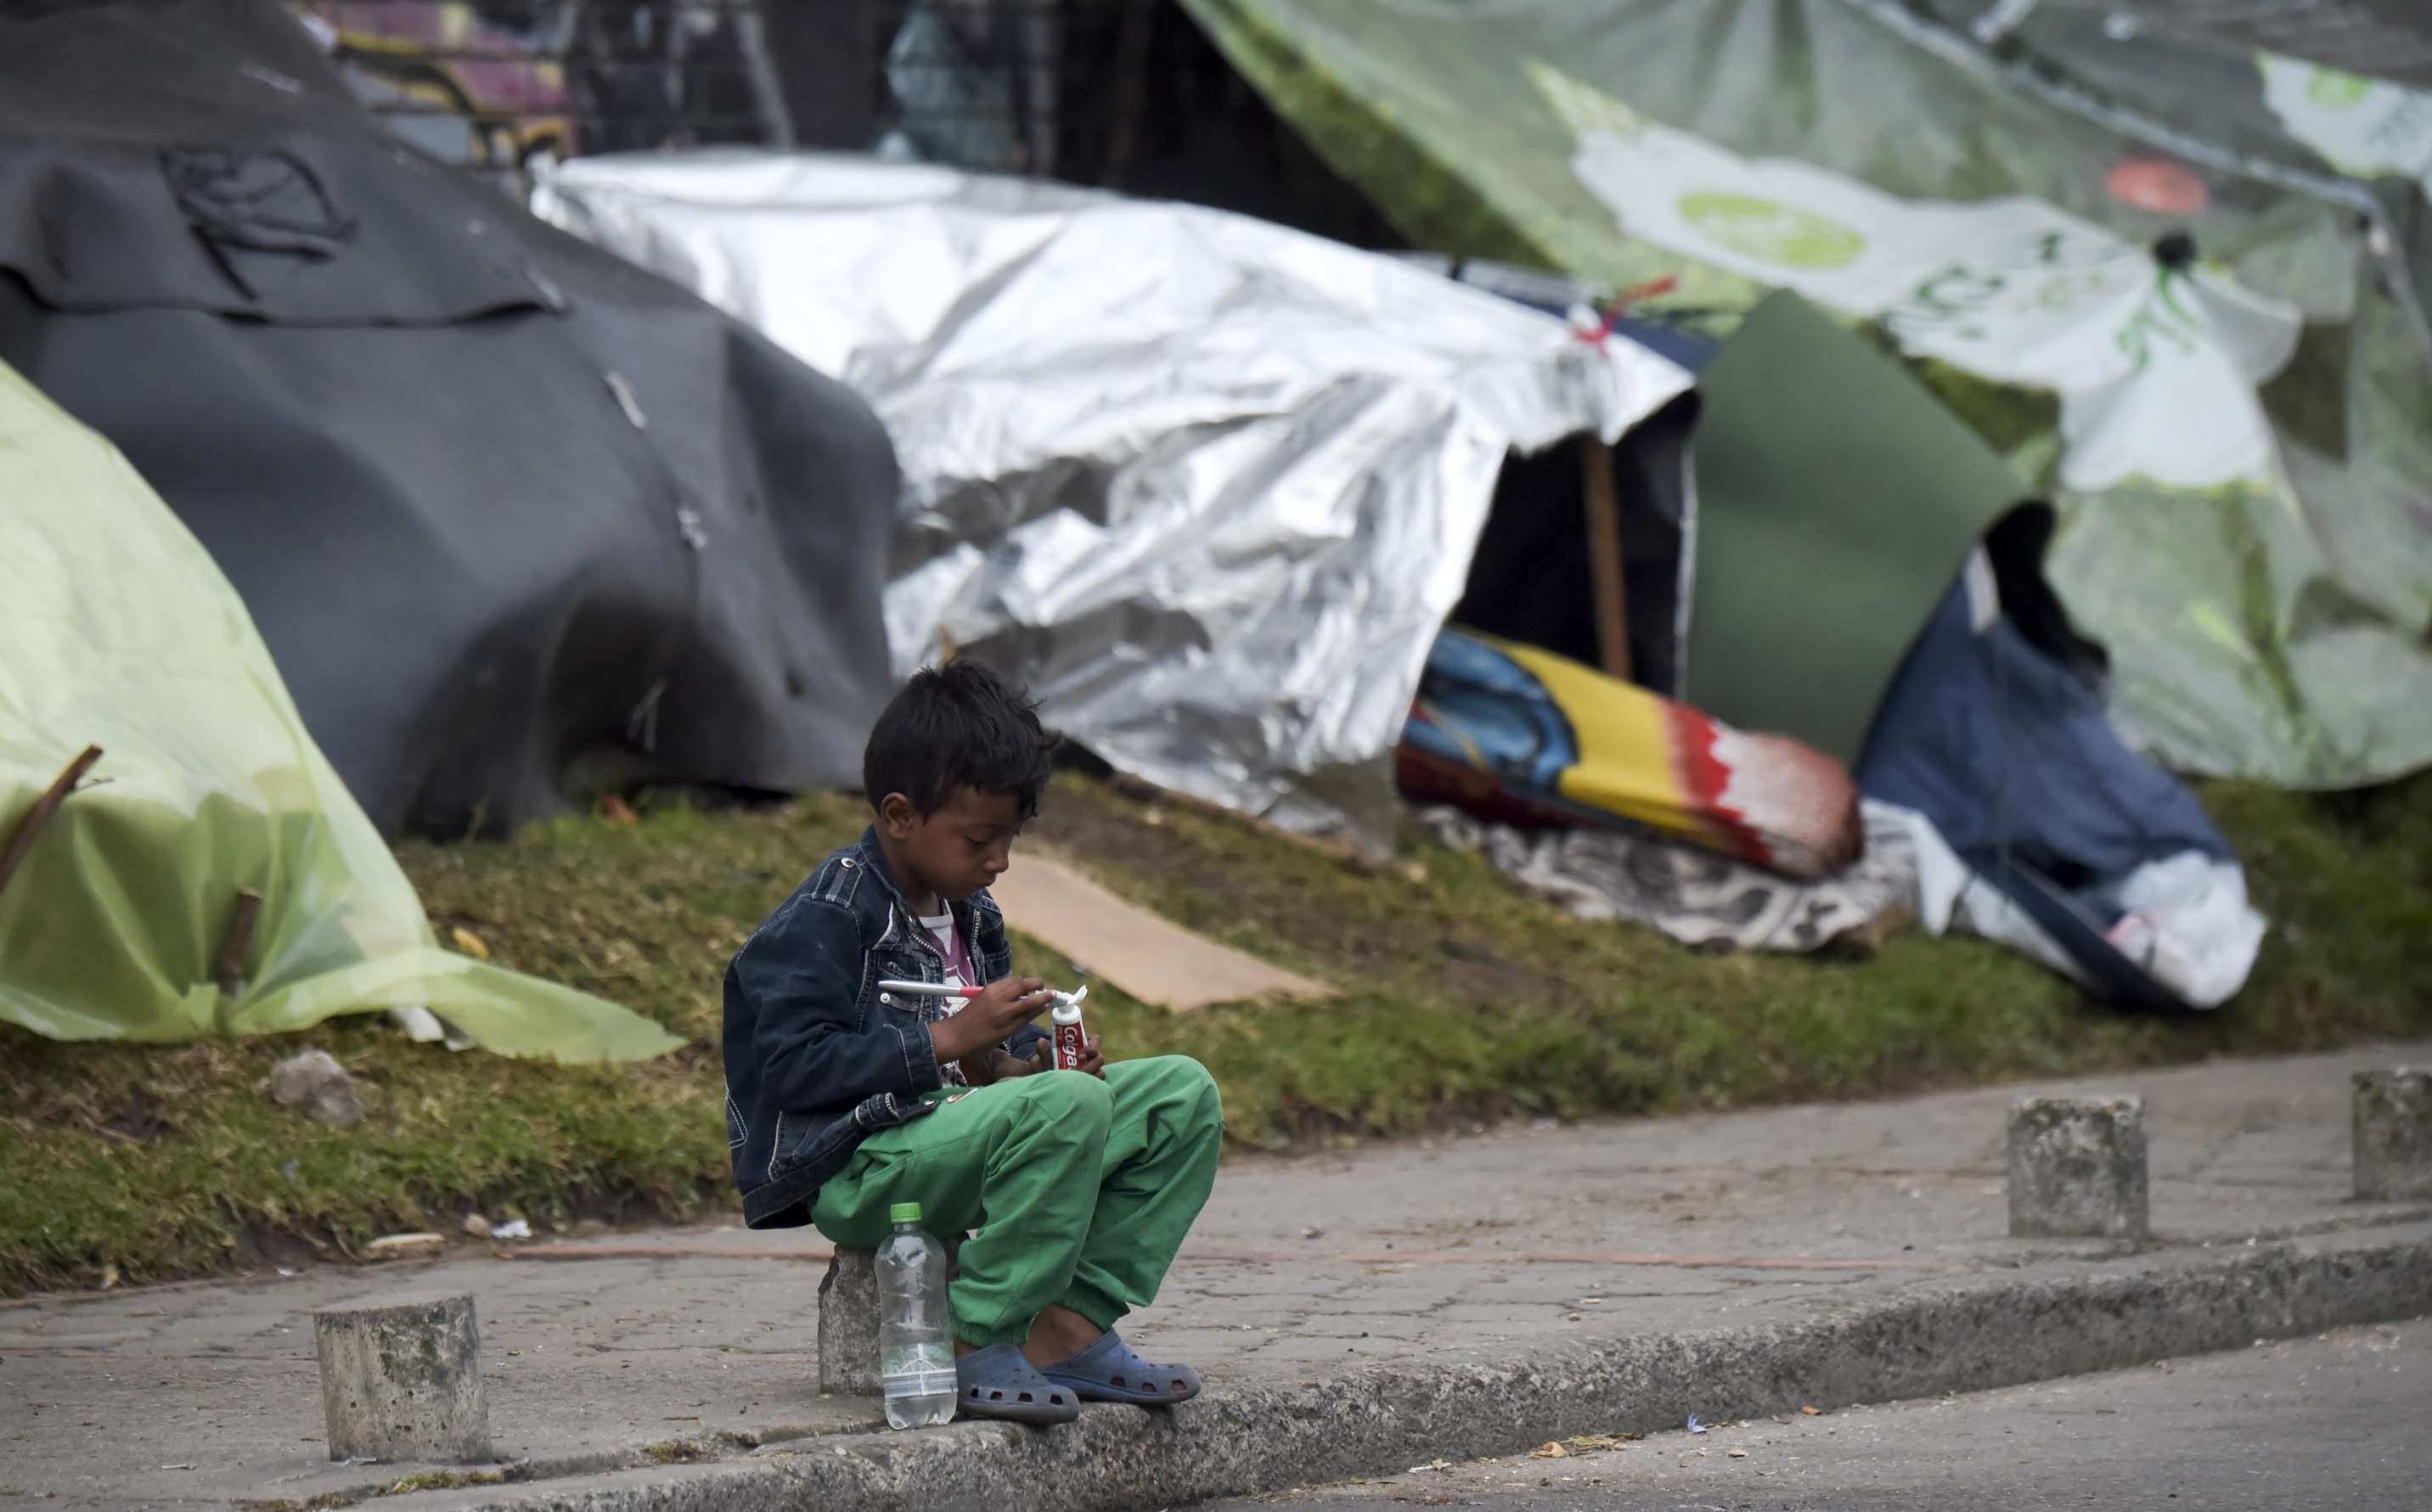 A Venezuelan migrant child prepares to brush his teeth at an improvised camp near a bus terminal in Bogota on November 9, 2018.